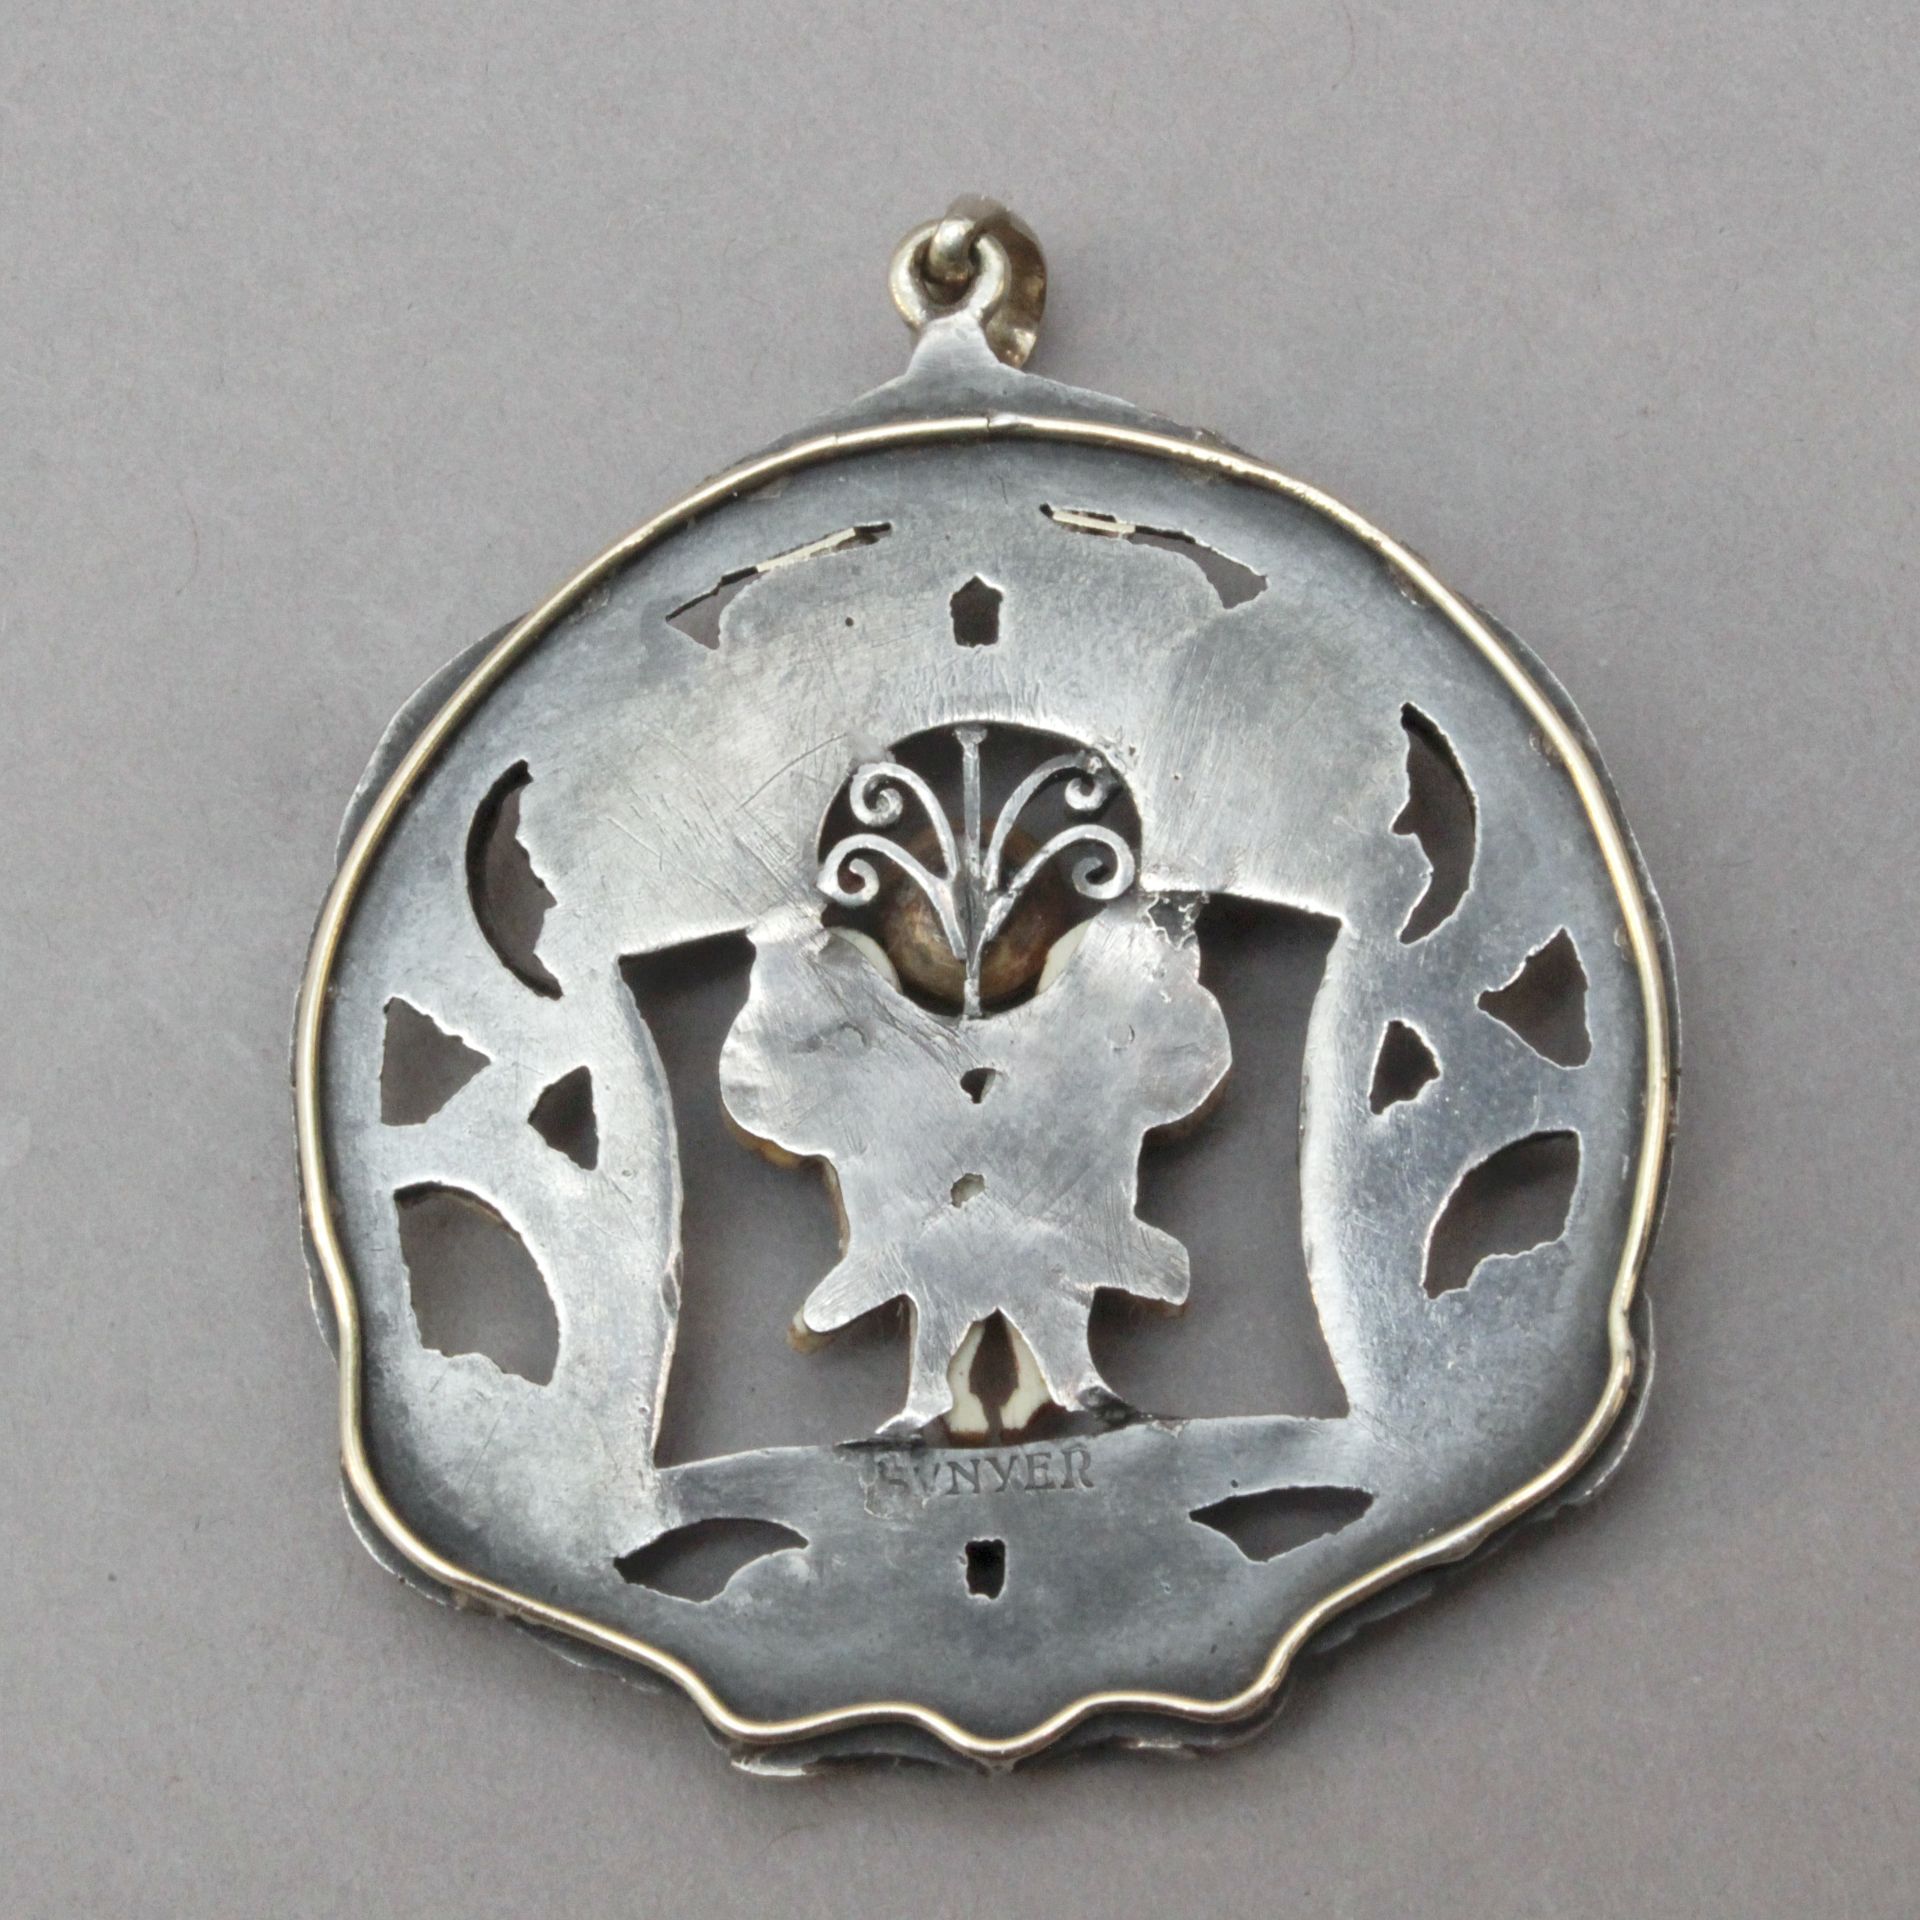 Ramon Sunyer Clarà. A silver and gold pendant - Image 3 of 3